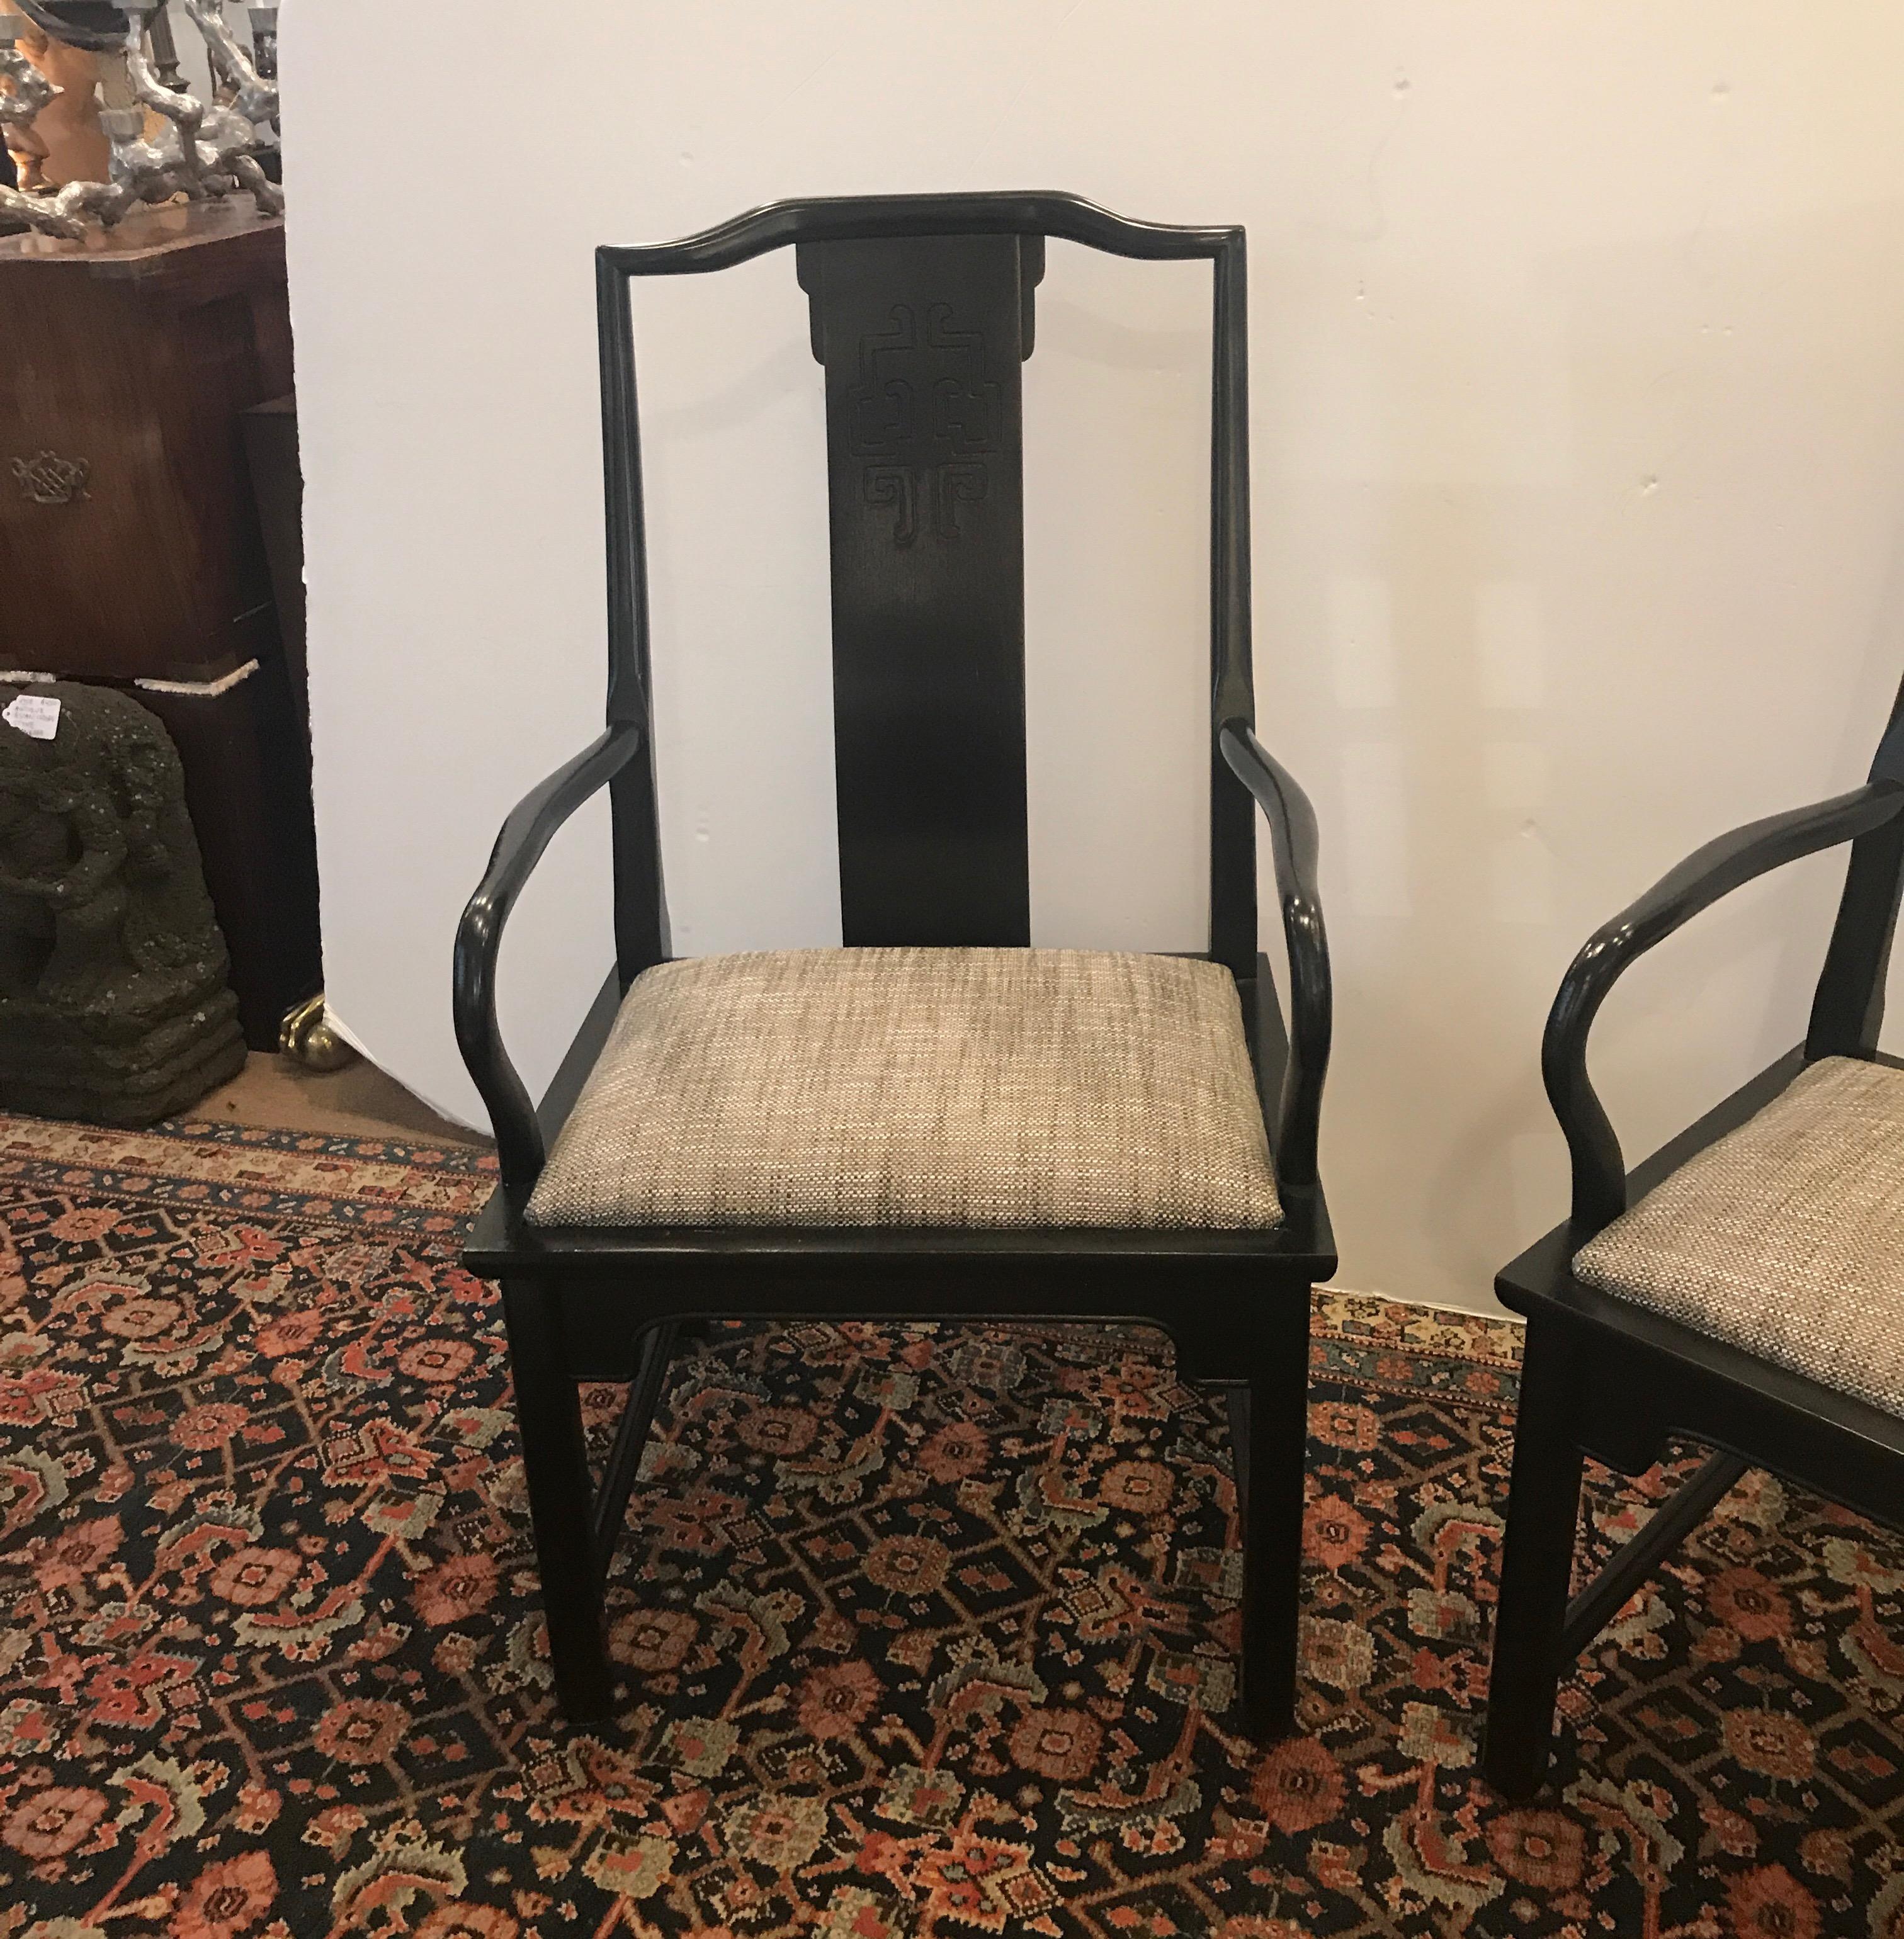 A pair of classically styled Asian style ebonized wood armchairs. The nubby textured woven padded seats contrast nicely to the dark frames. The fabric an be easily changed to suit the rooms interior. The slightly curved backs with a carved Asian